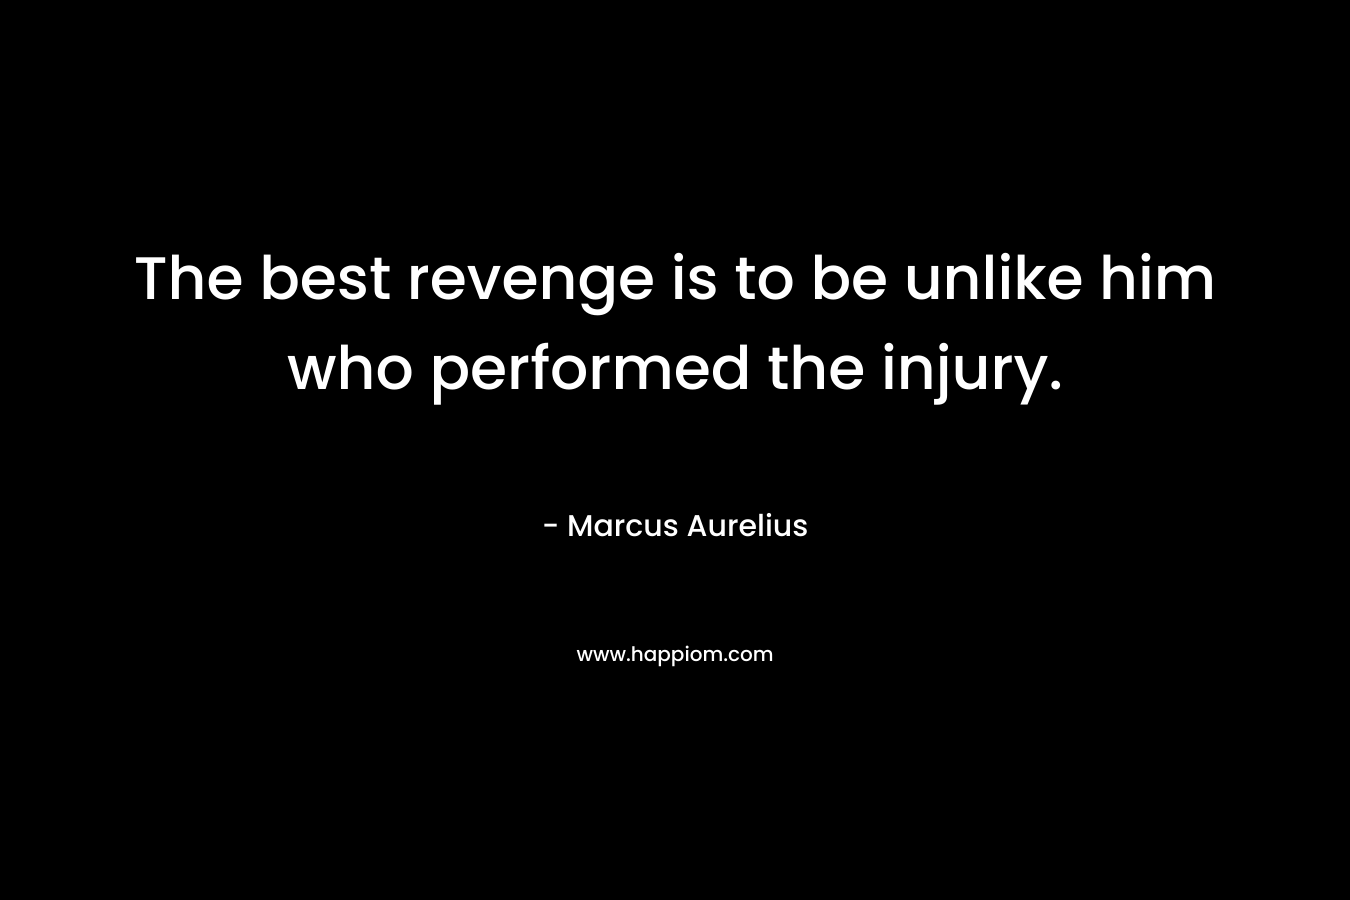 The best revenge is to be unlike him who performed the injury. – Marcus Aurelius